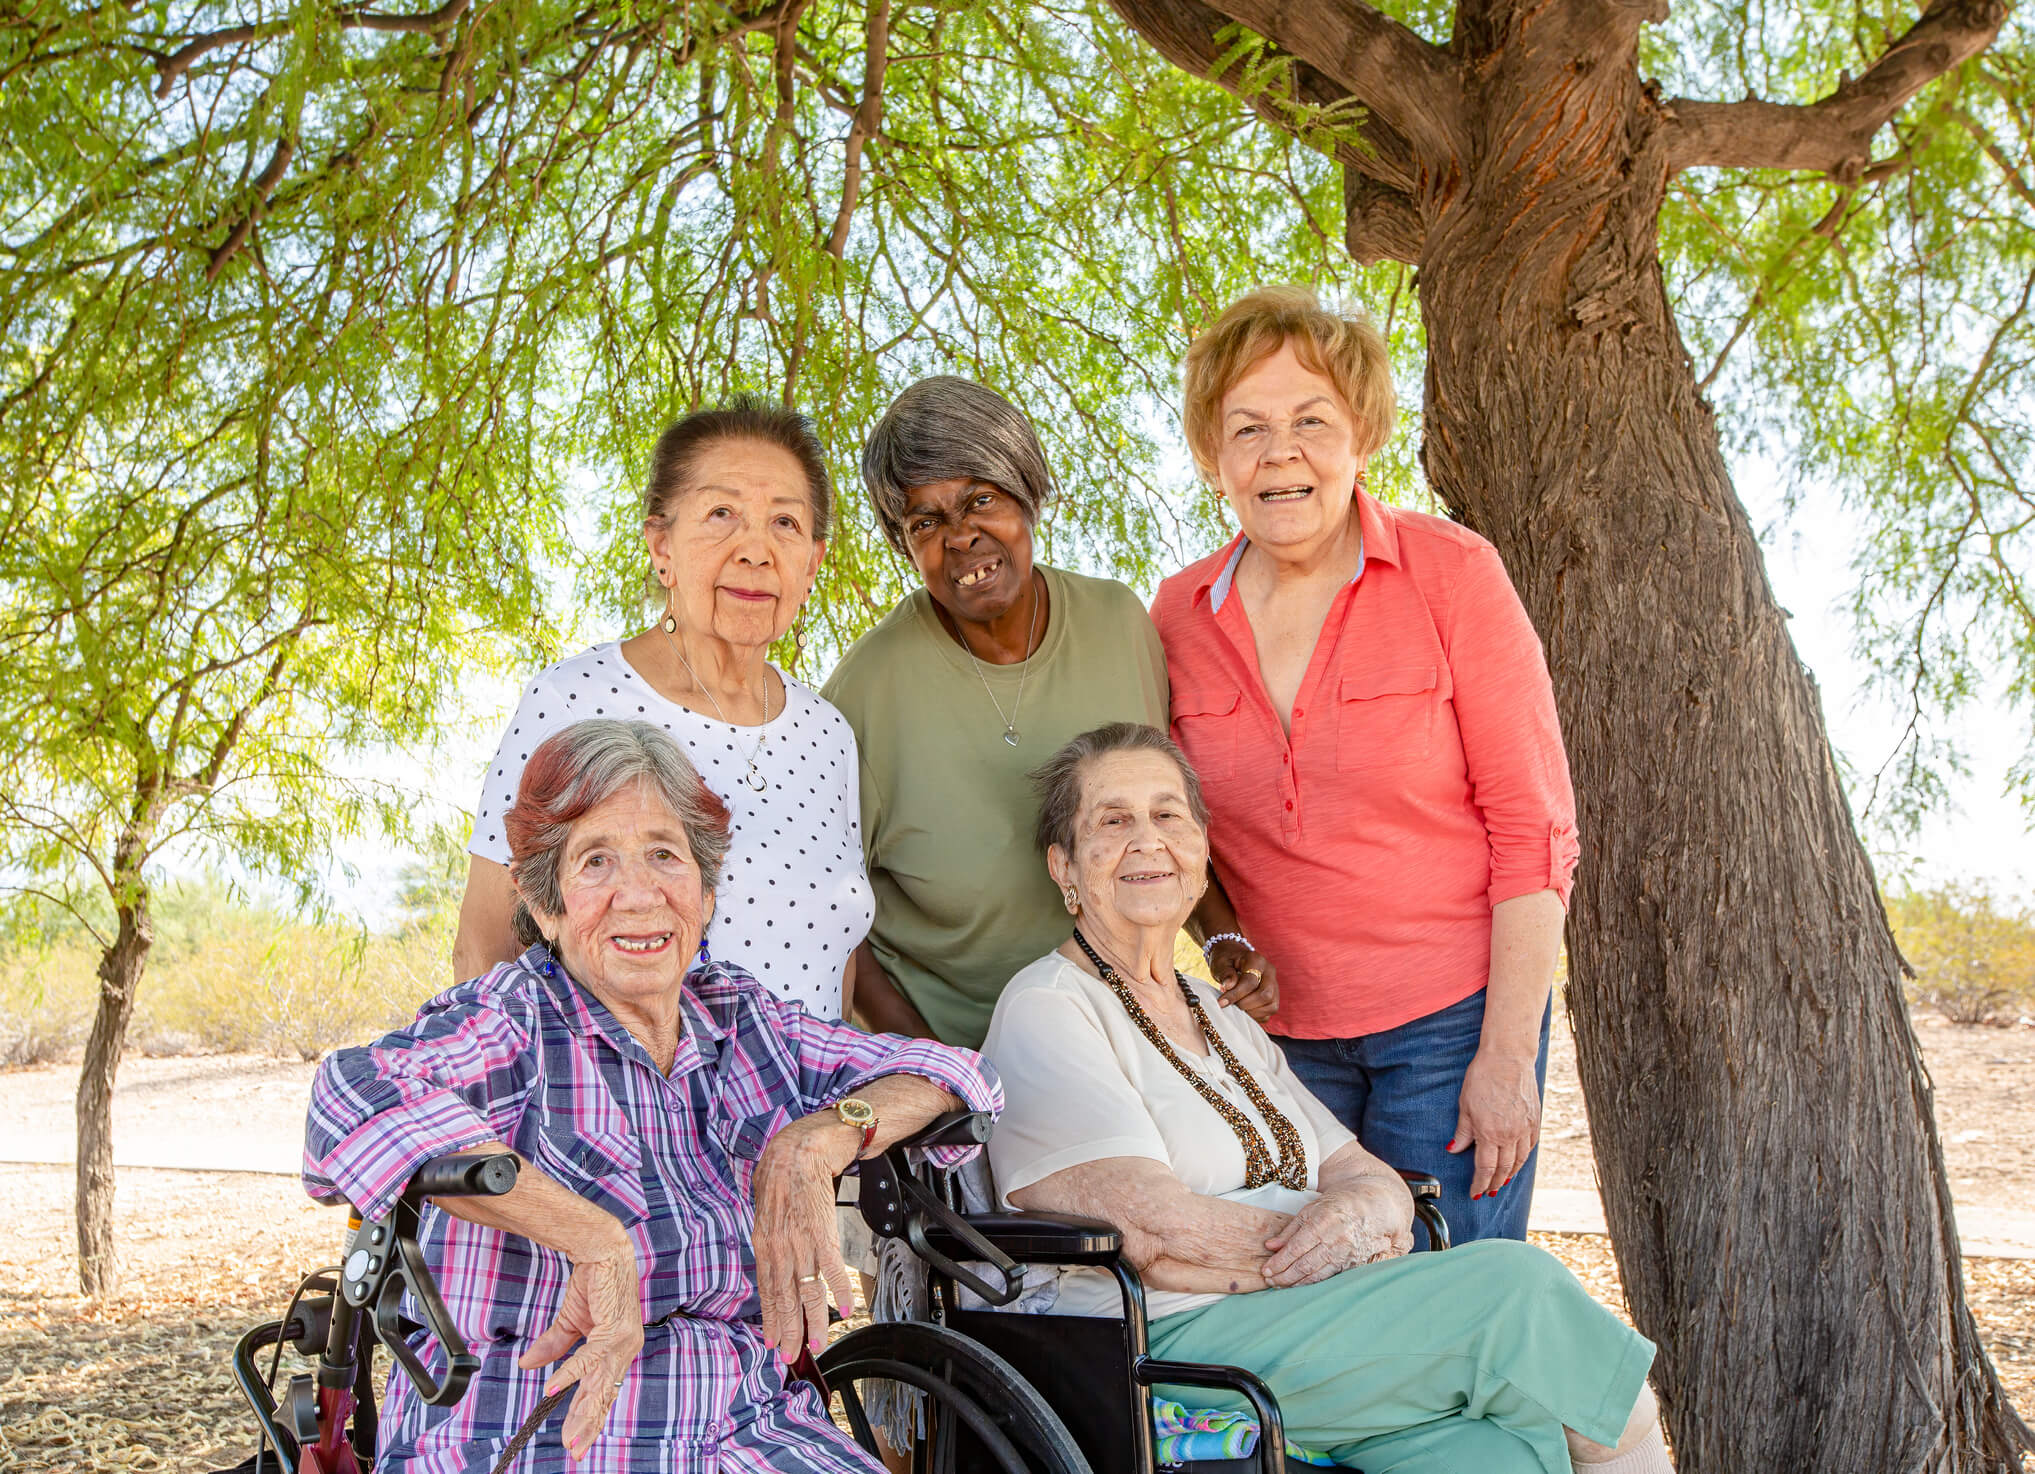 A group of elderly women in wheelchairs posing for a photo.